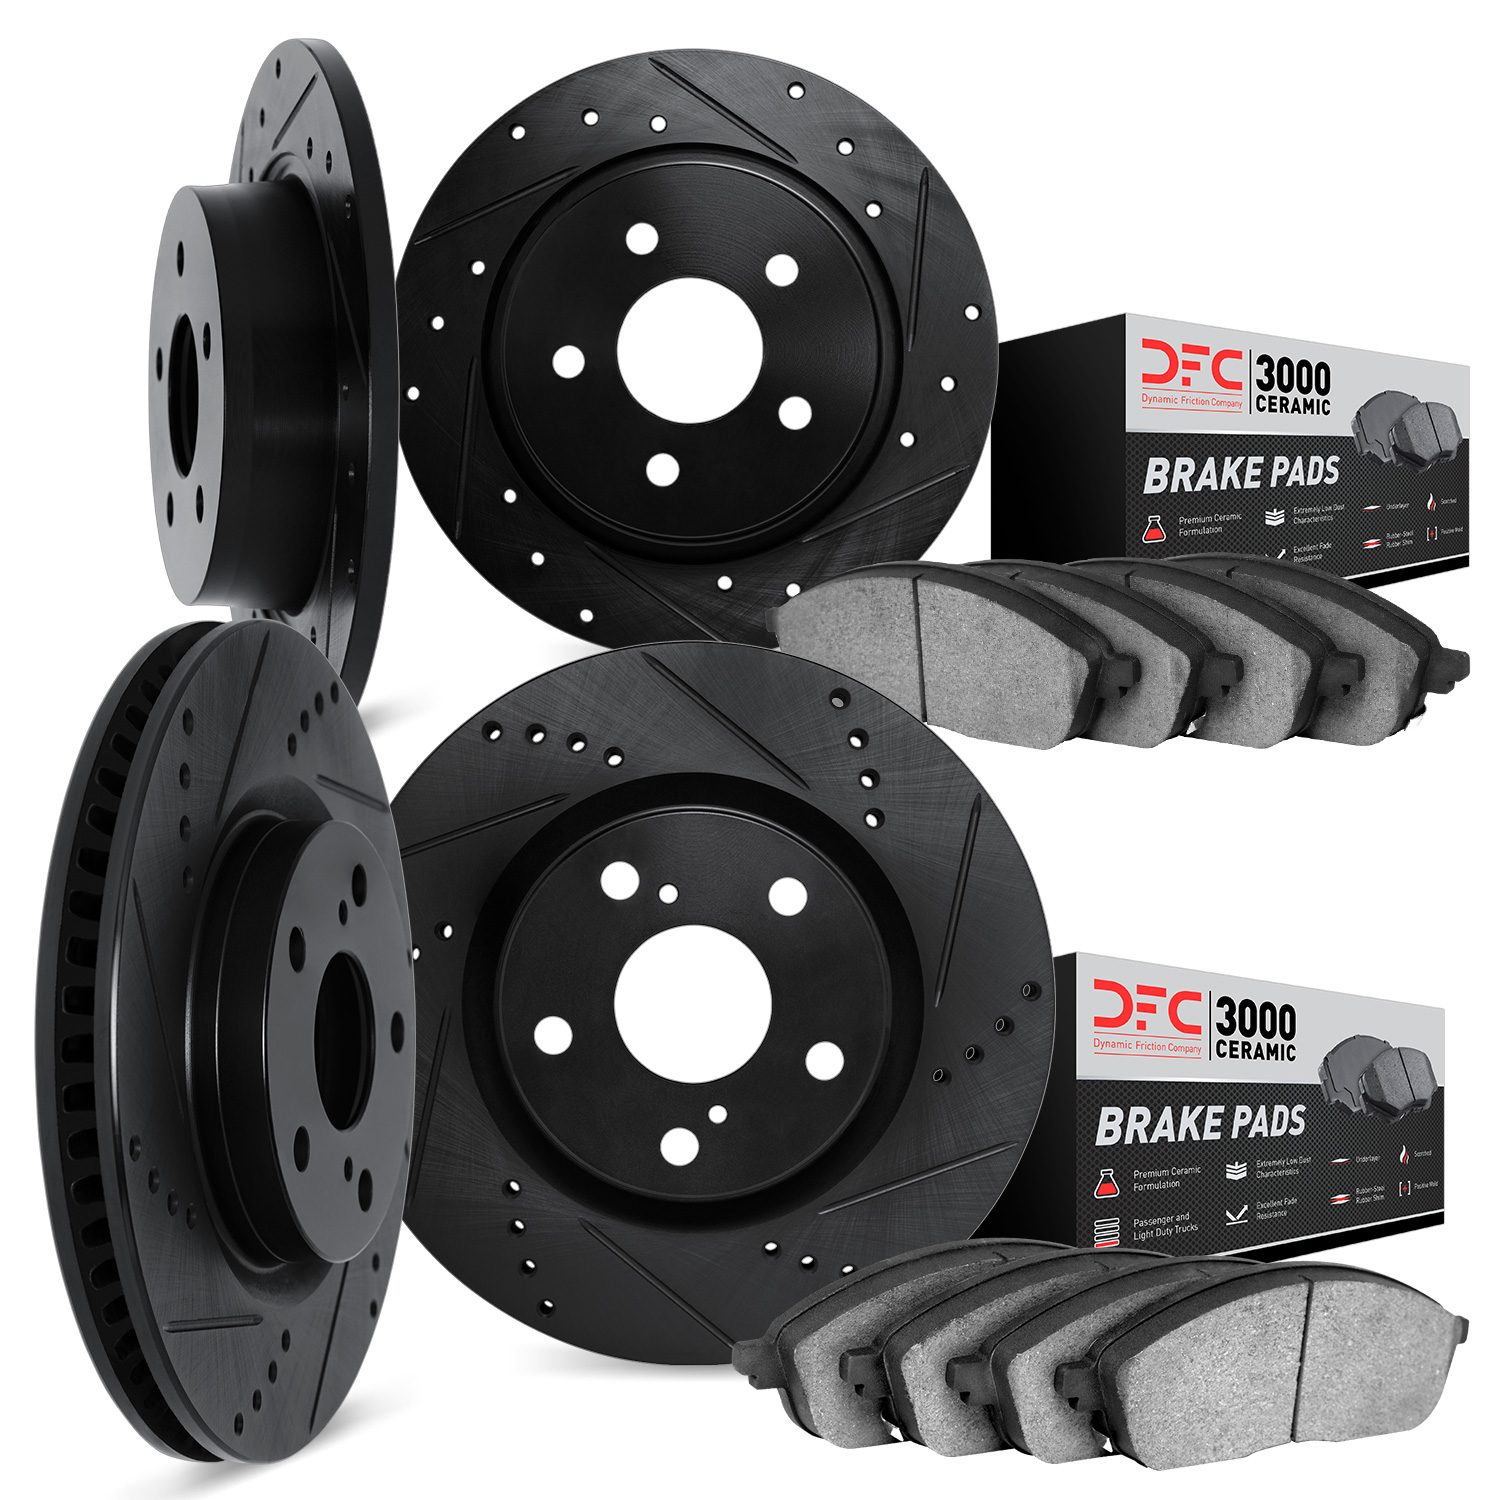 8304-31005 Drilled/Slotted Brake Rotors with 3000-Series Ceramic Brake Pads Kit [Black], 1981-1982 BMW, Position: Front and Rear